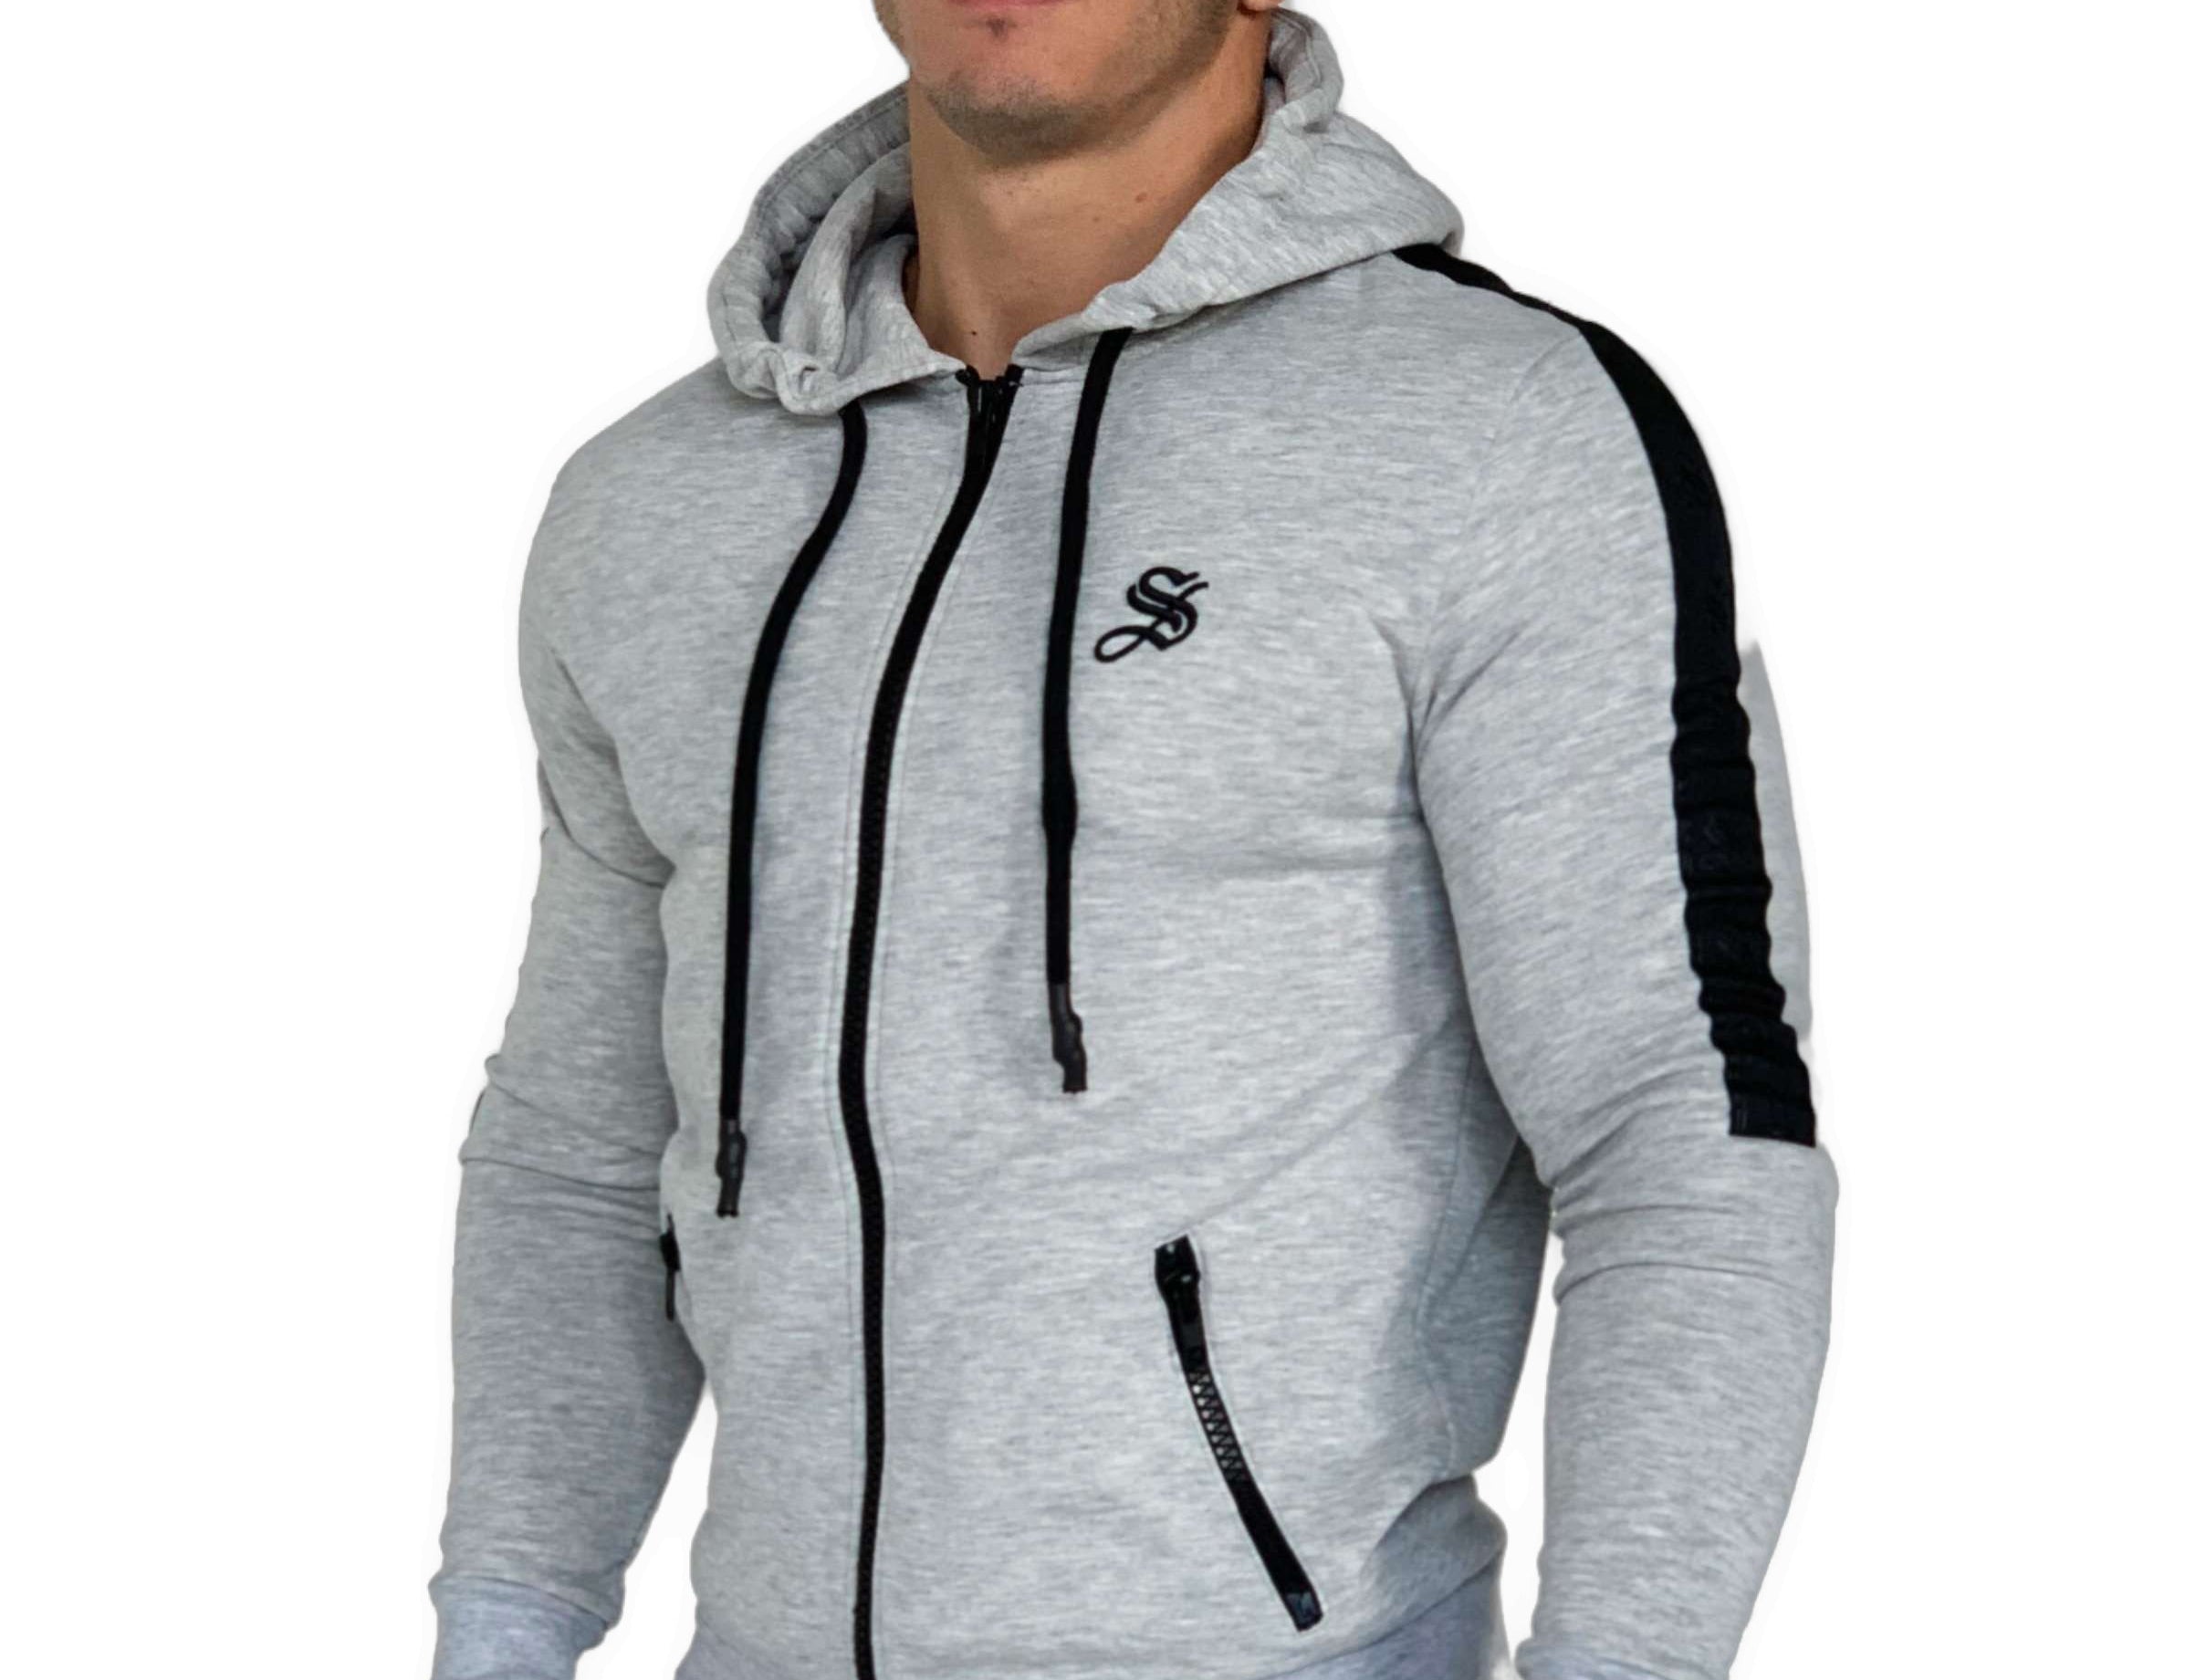 Prang - Grey Track Top for Men (PRE-ORDER DISPATCH DATE 25 September 2024) - Sarman Fashion - Wholesale Clothing Fashion Brand for Men from Canada